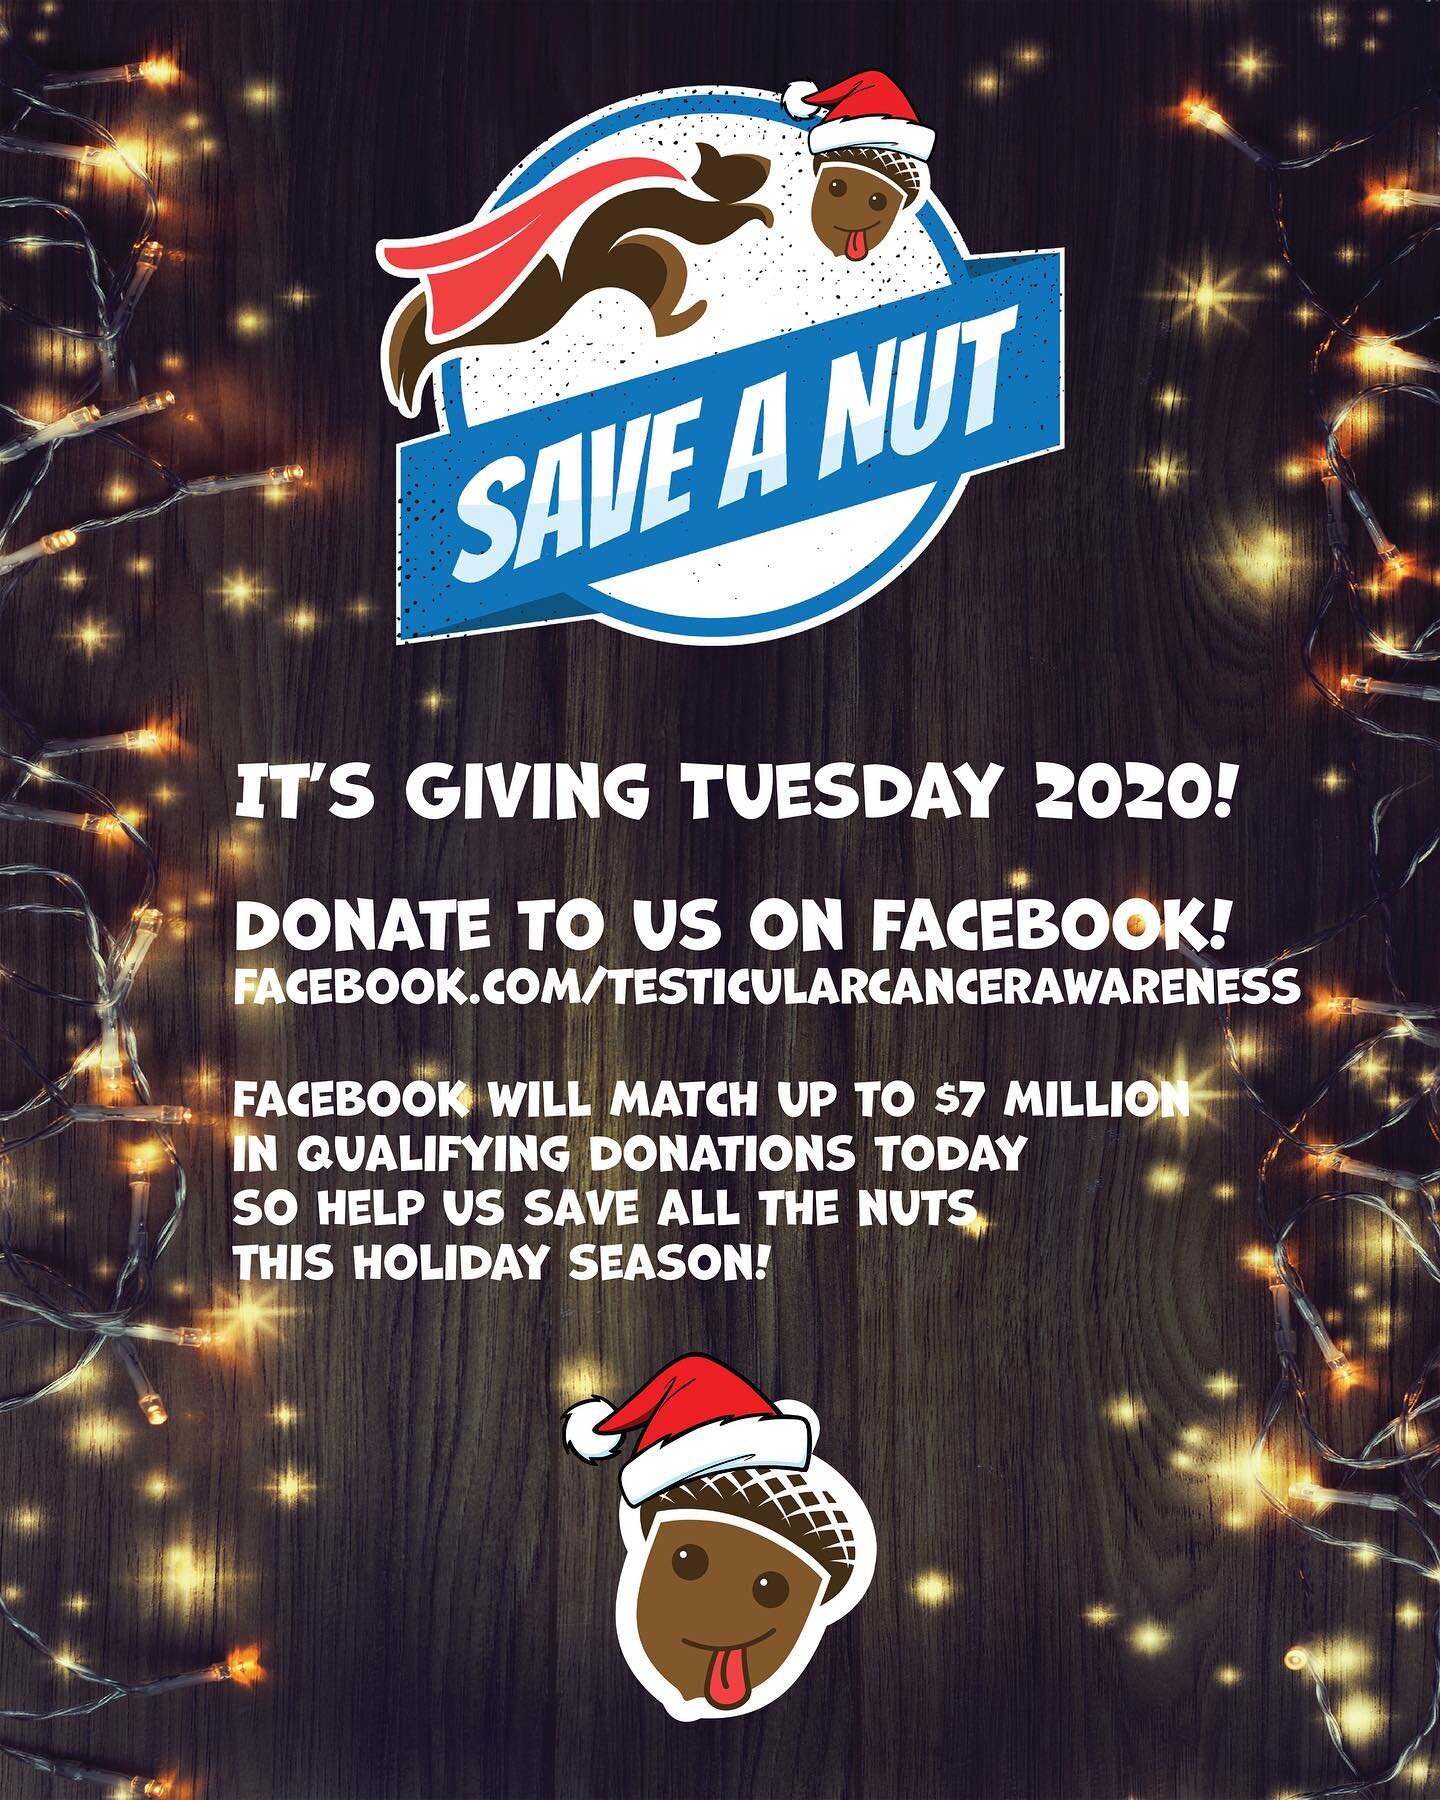 NOW YOU CAN DONATE TO US ON FACEBOOK! For #GivingTuesday2020 Facebook will match $7 million in qualifying donations this year for nonprofits worldwide! Let&rsquo;s get on it! Click the link in our bio to hep us support our efforts in Testicular Cance